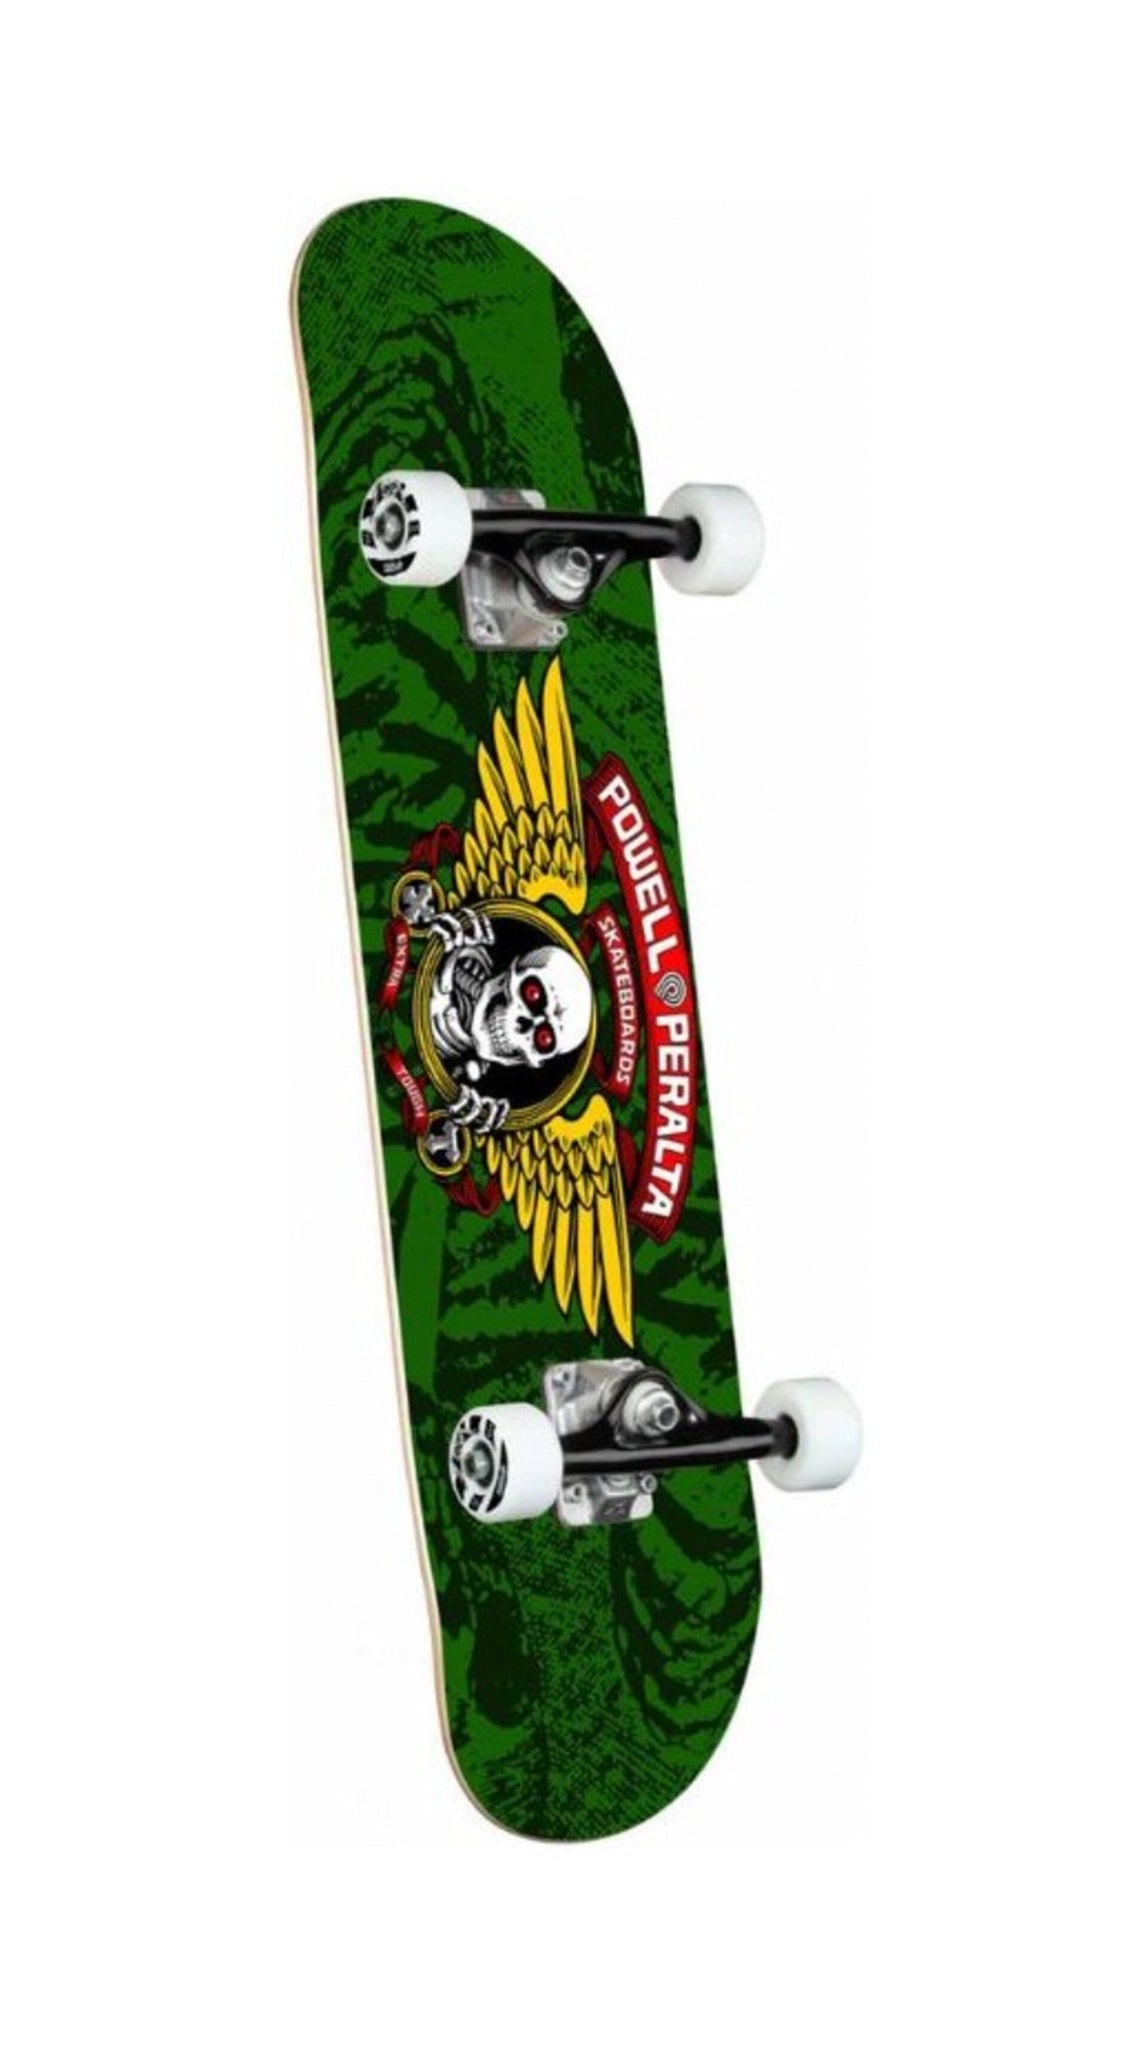 Powell Peralta Winged Ripper Green 8.0 Completo - Completos Completos Powell Peralta 